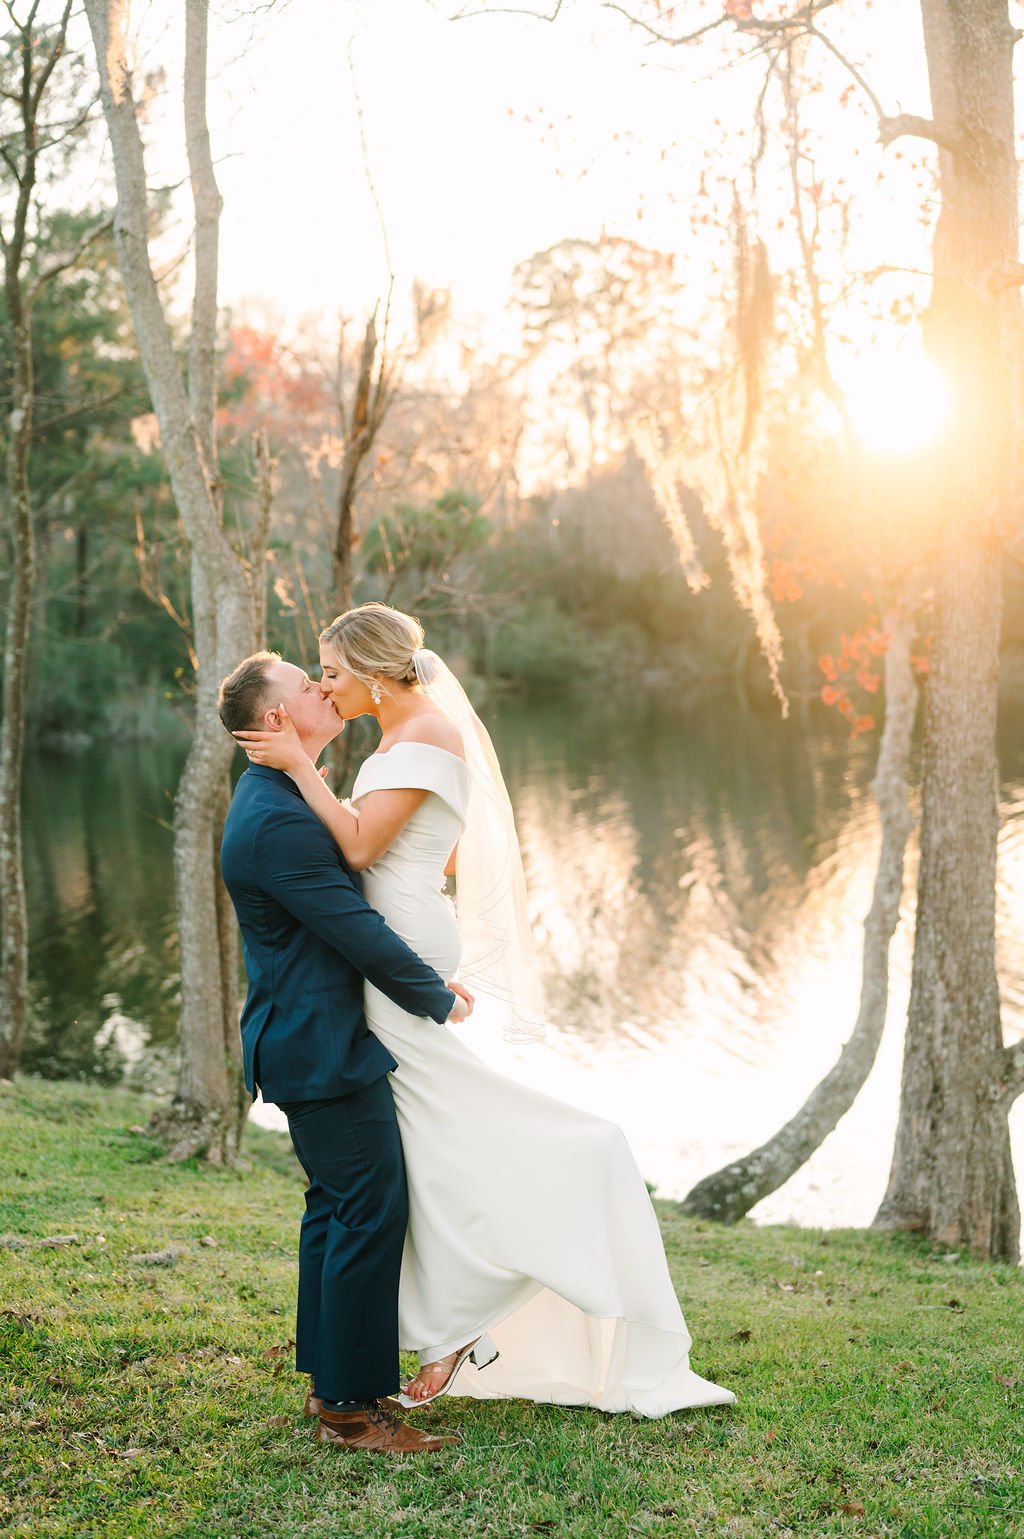 delaney-and-joshuas-real-savannah-wedding-at-red-gate-farms-planned-by-savannah-wedding-planner-ivory-and-beau-with-wedding-florals-from-savannah-wedding-florist-ivory-and-beau-shot-by-5d-photography-savannah-wedding-savannah-bride-18.jpg